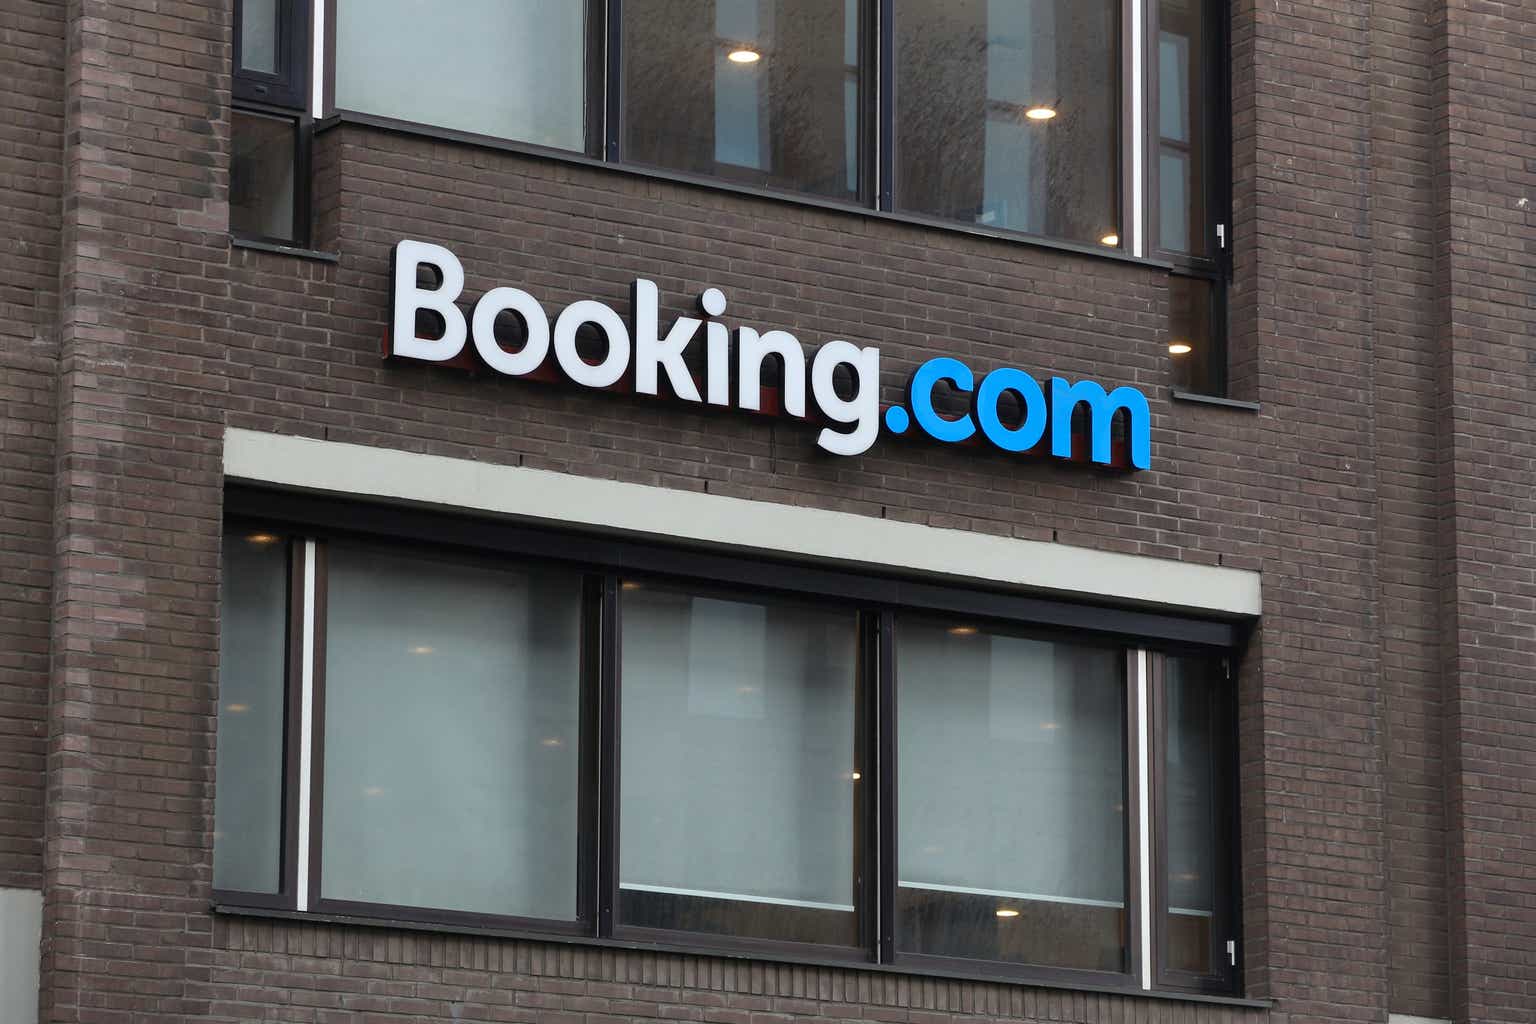 Booking holding. Офис booking Амстердаме. Booking com офис. Booking Office. Booking holdings.